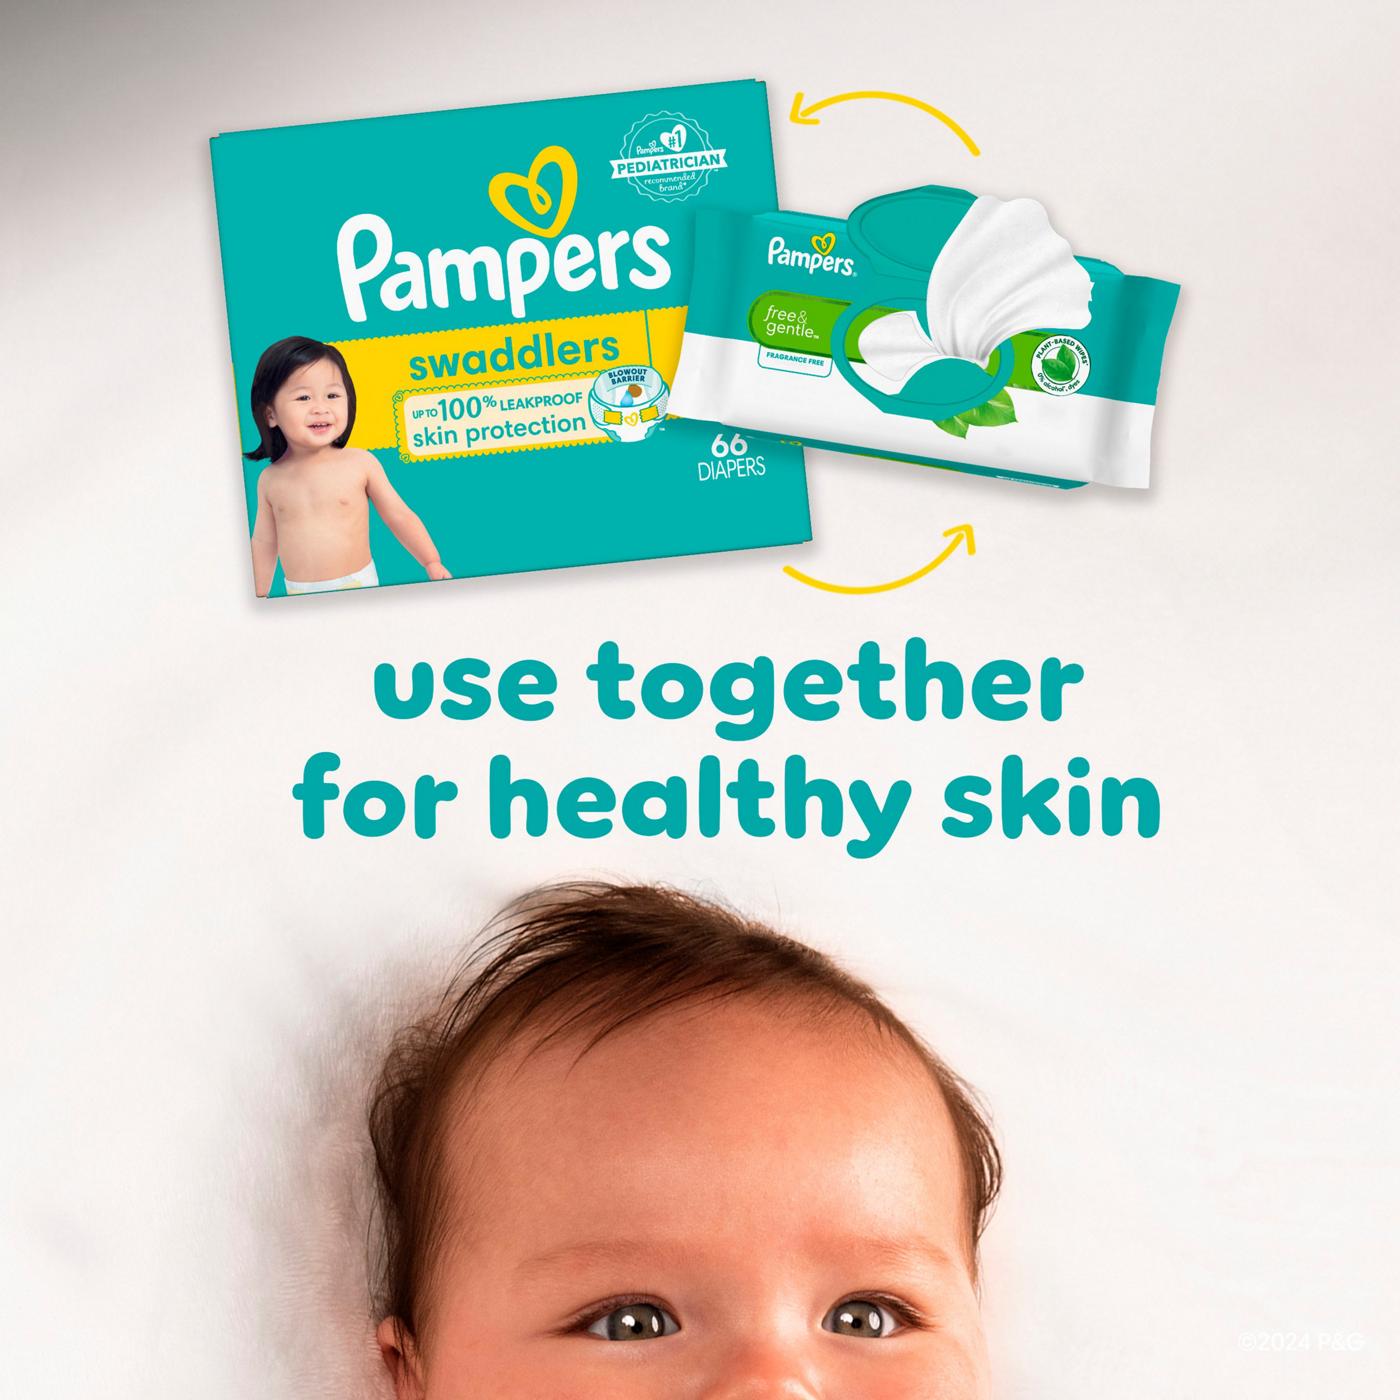 Pampers Free & Gentle Plant Based Baby Wipes 2 pk; image 7 of 10